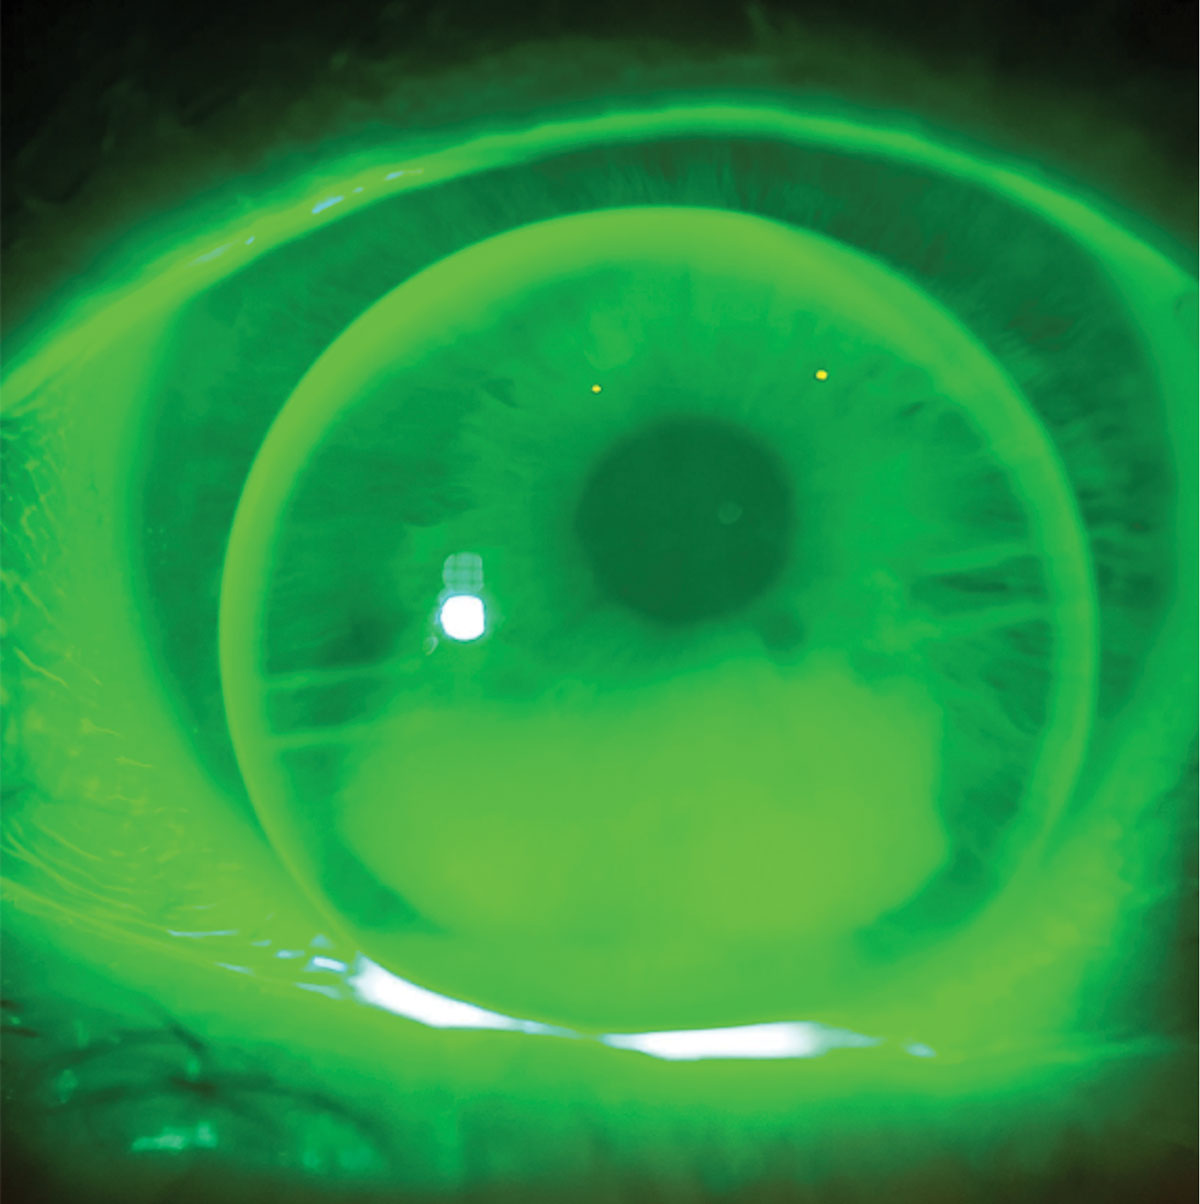 Fig. 5. Seg height was brought down 0.2mm to improve the patient’s vision at distance while still allowing easy access to the intermediate and near zones in the translating trifocal optic.